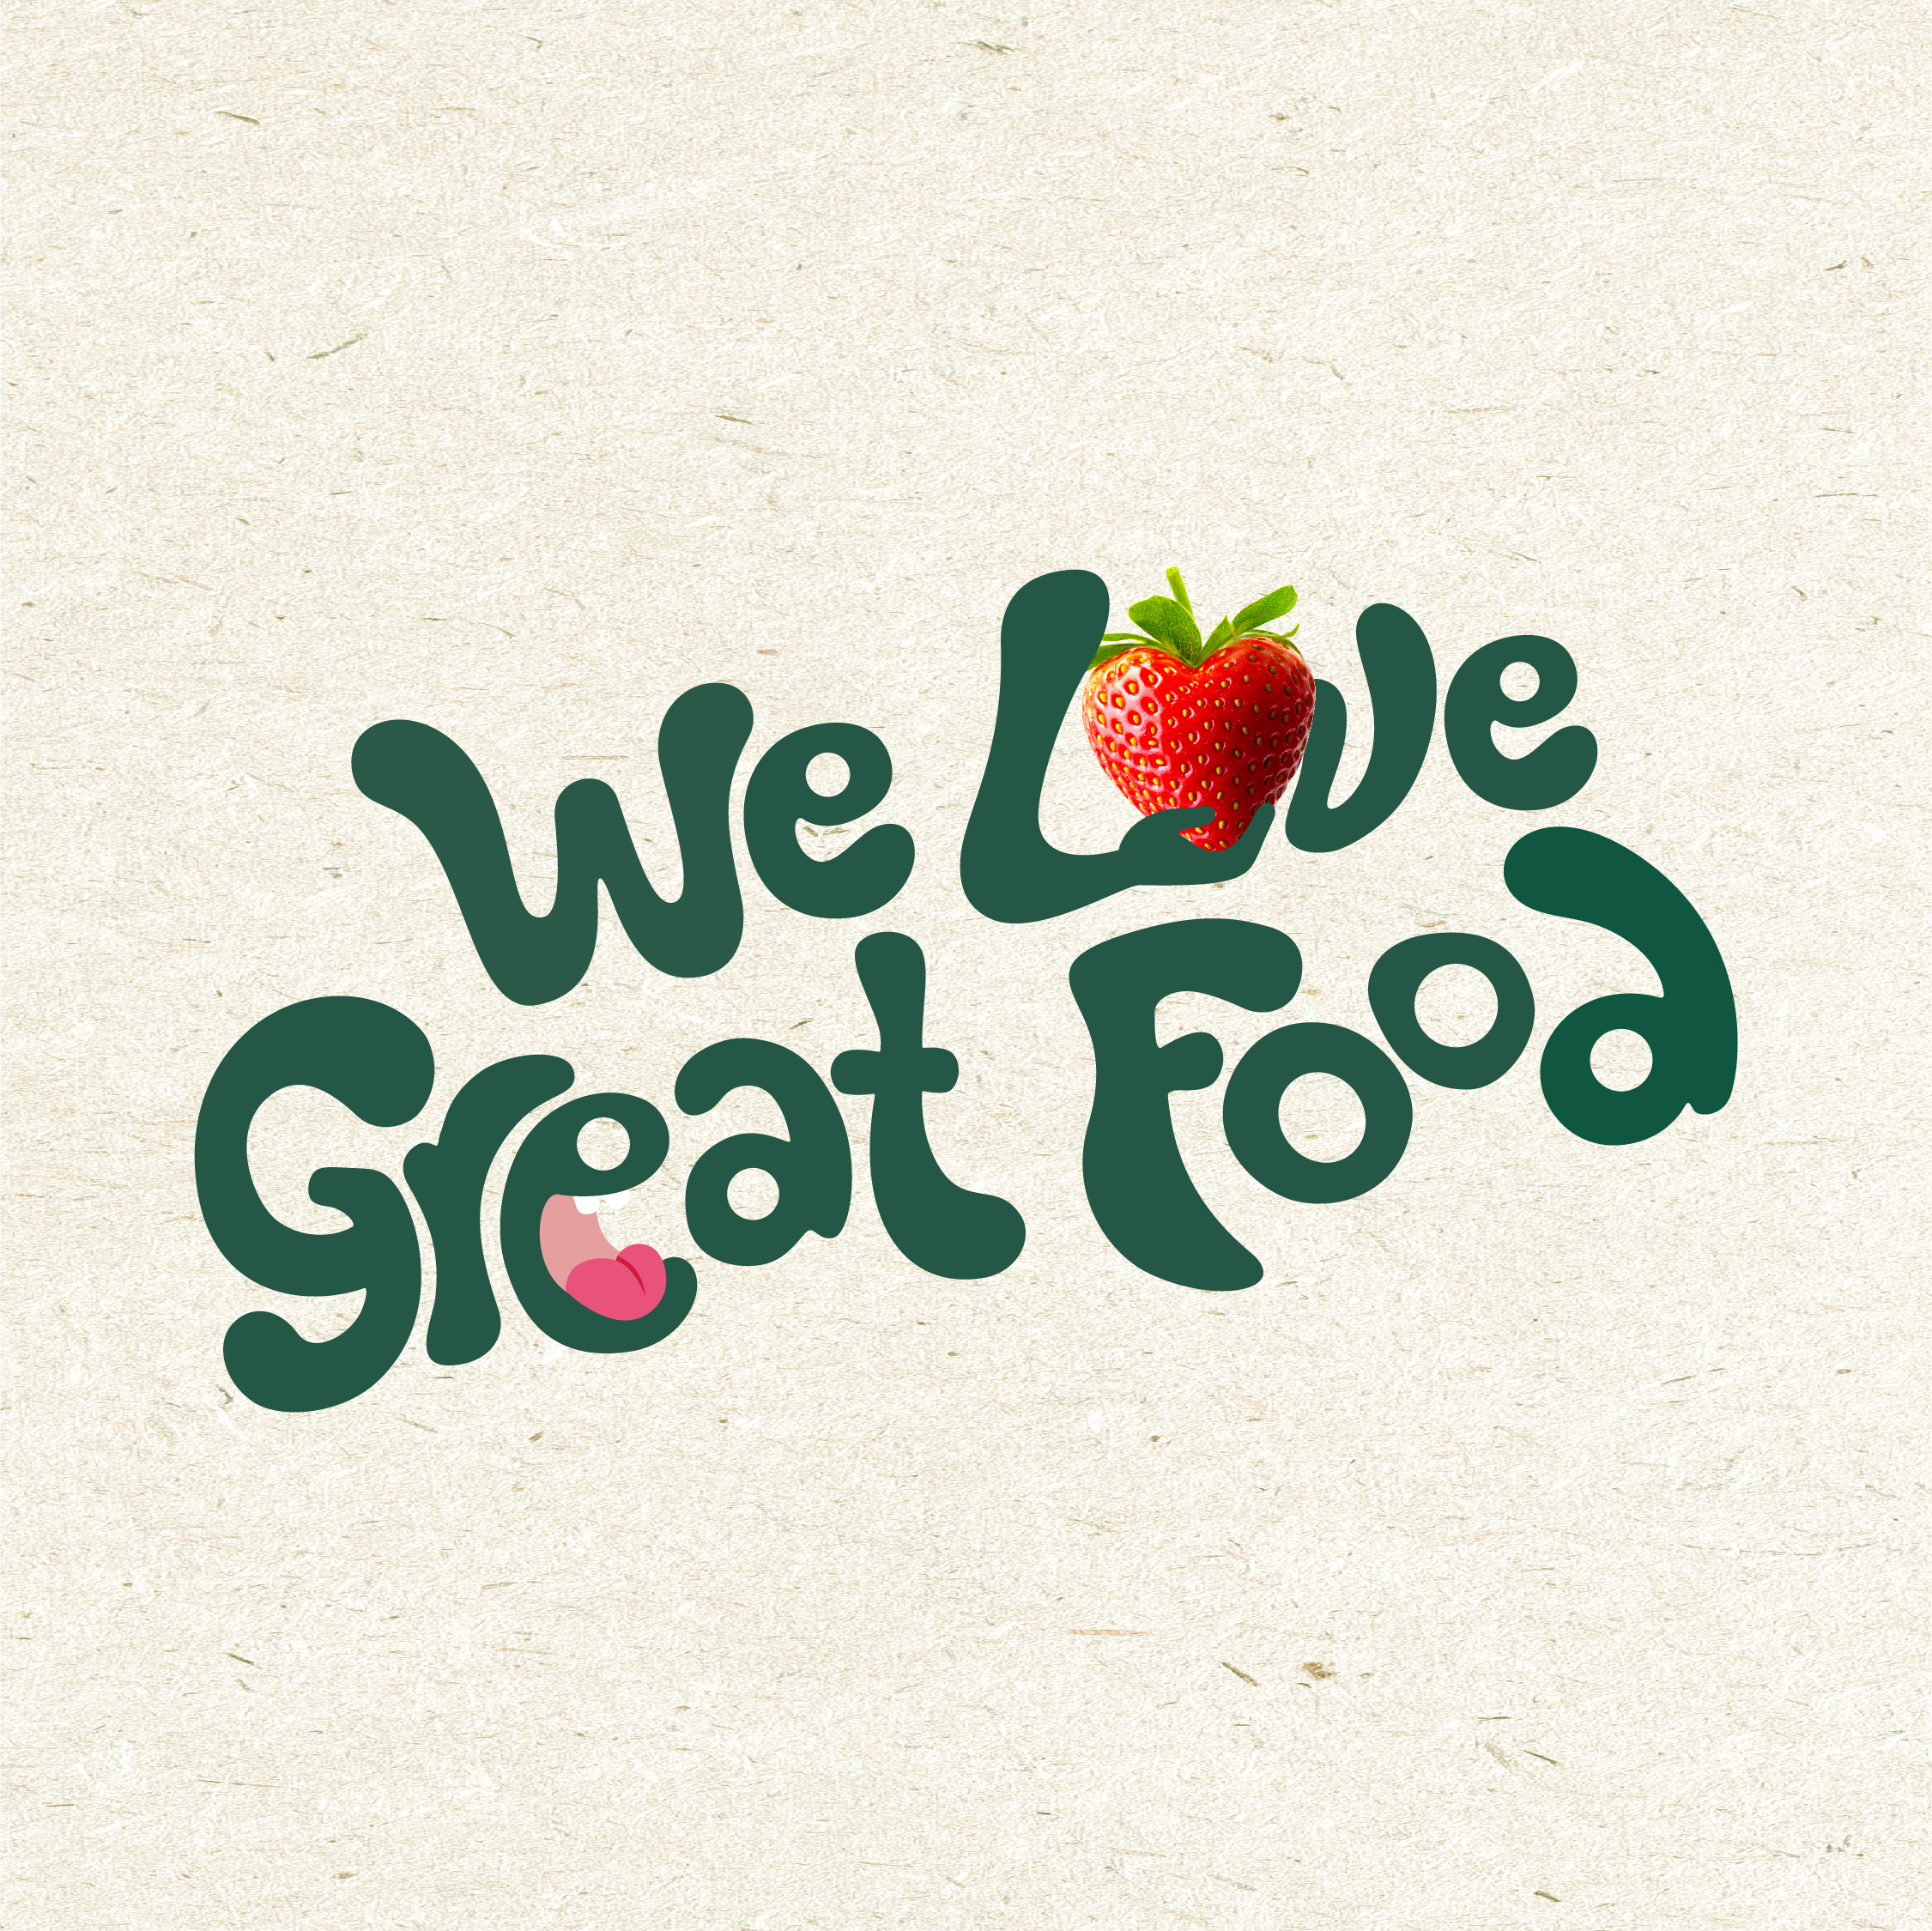 We love great food text with two hands holding a straberry. Text is dark green and a beige textured background